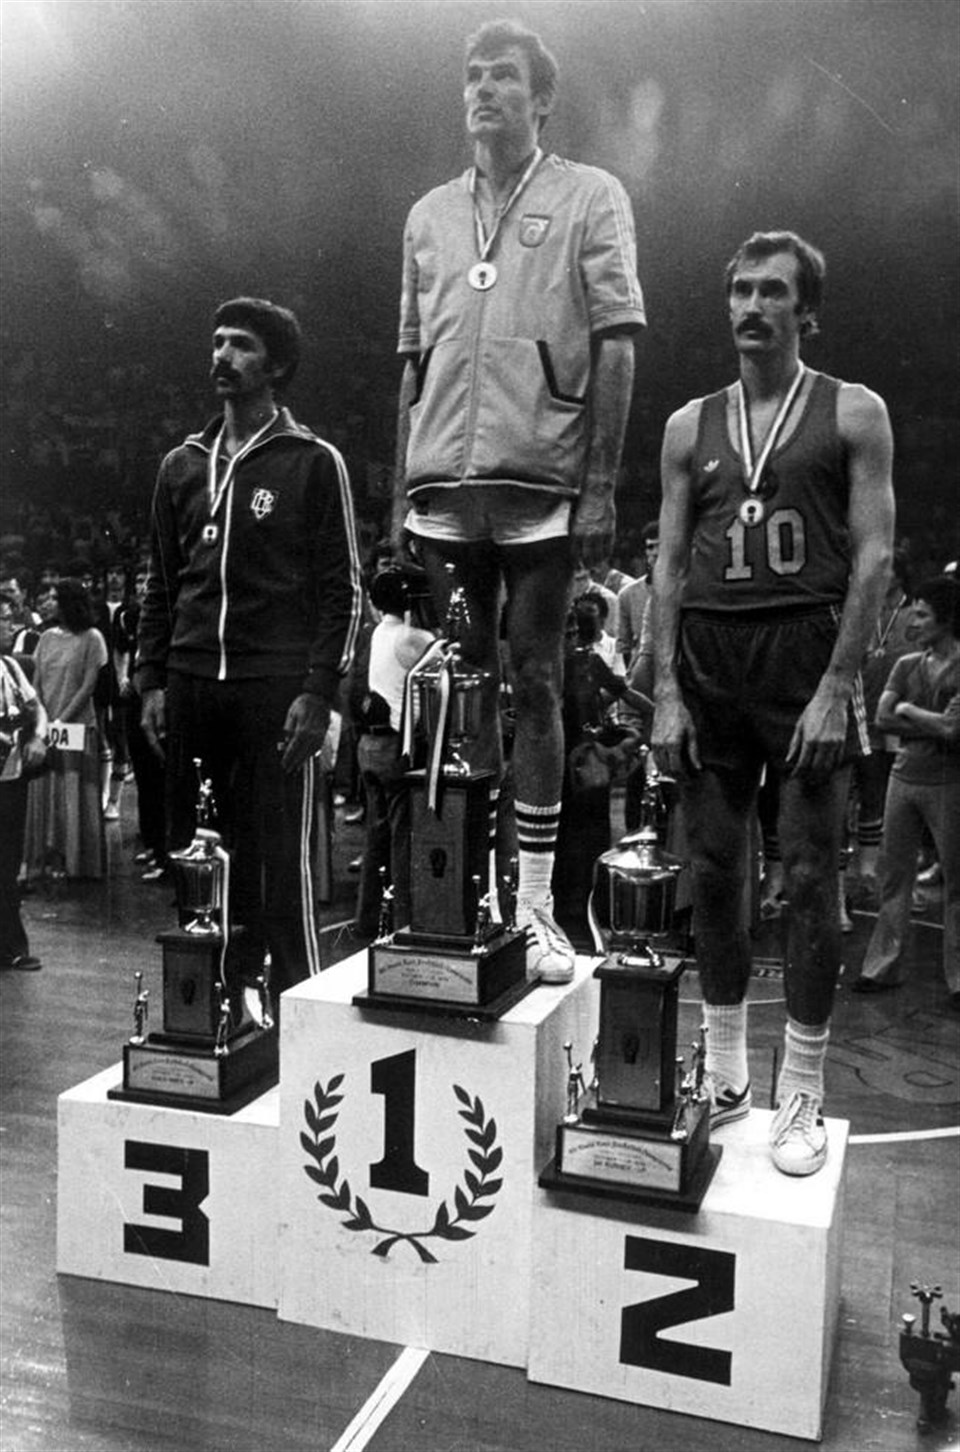 The top three finishers of the 1978 FIBA World Cup